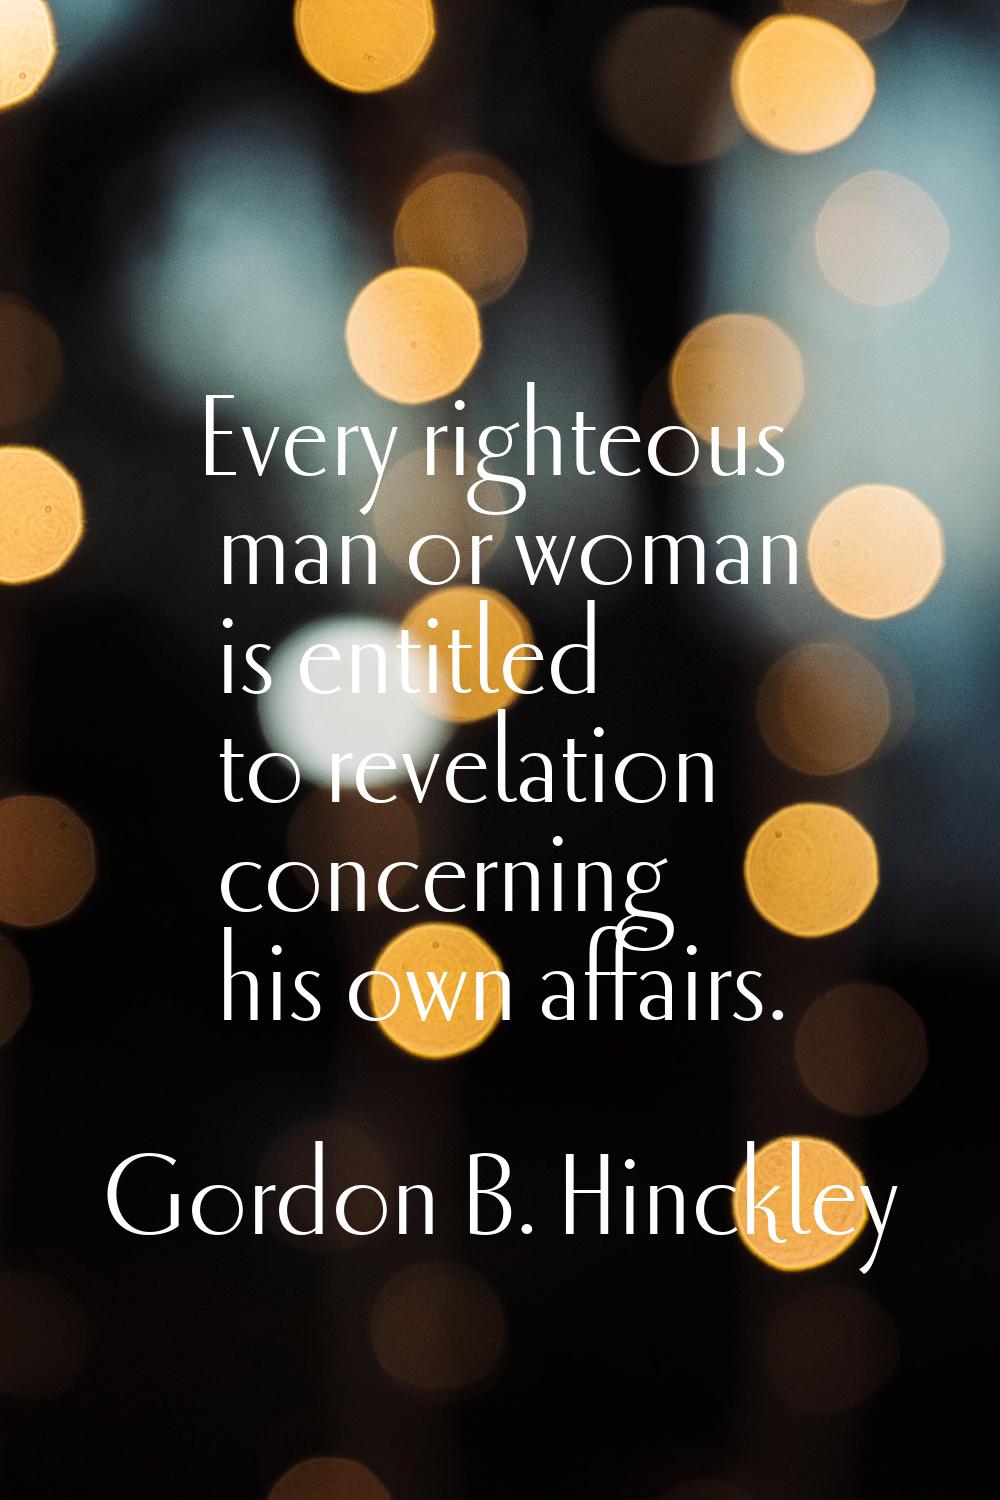 Every righteous man or woman is entitled to revelation concerning his own affairs.